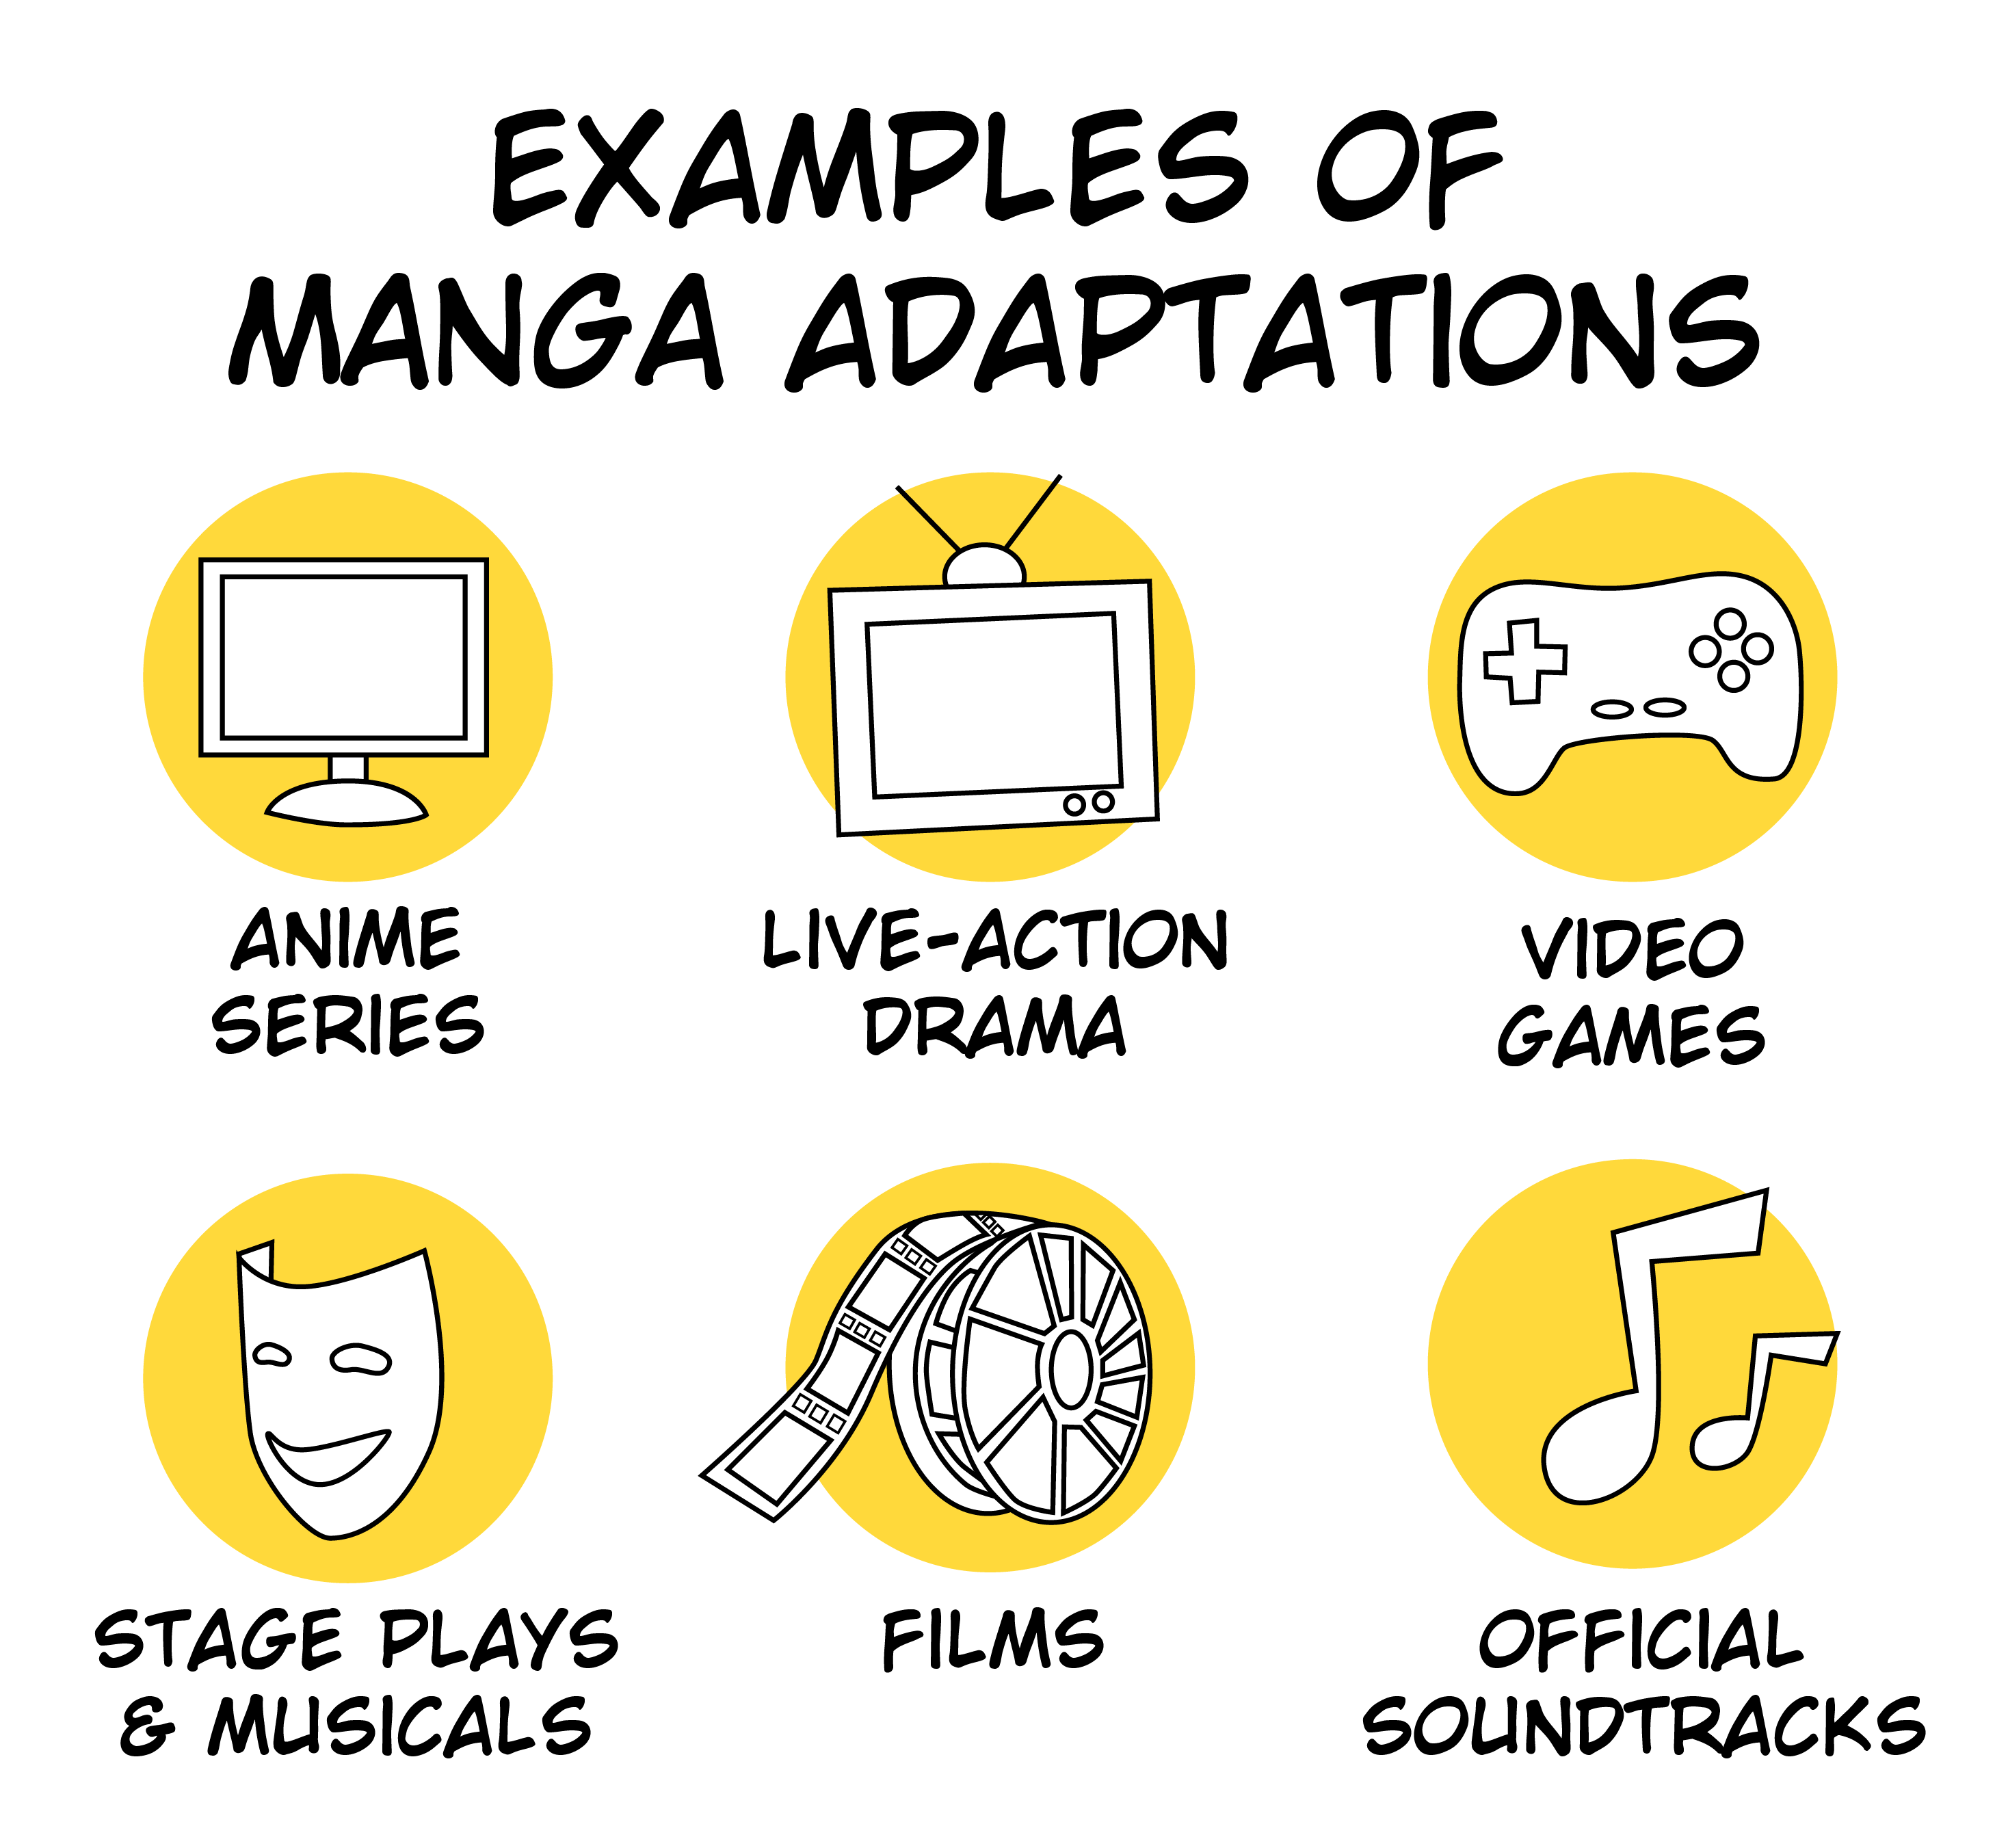 Examples of manga adaptations include anime series, live-action drama, video games, stage plays and musicals, films, and official soundtracks.